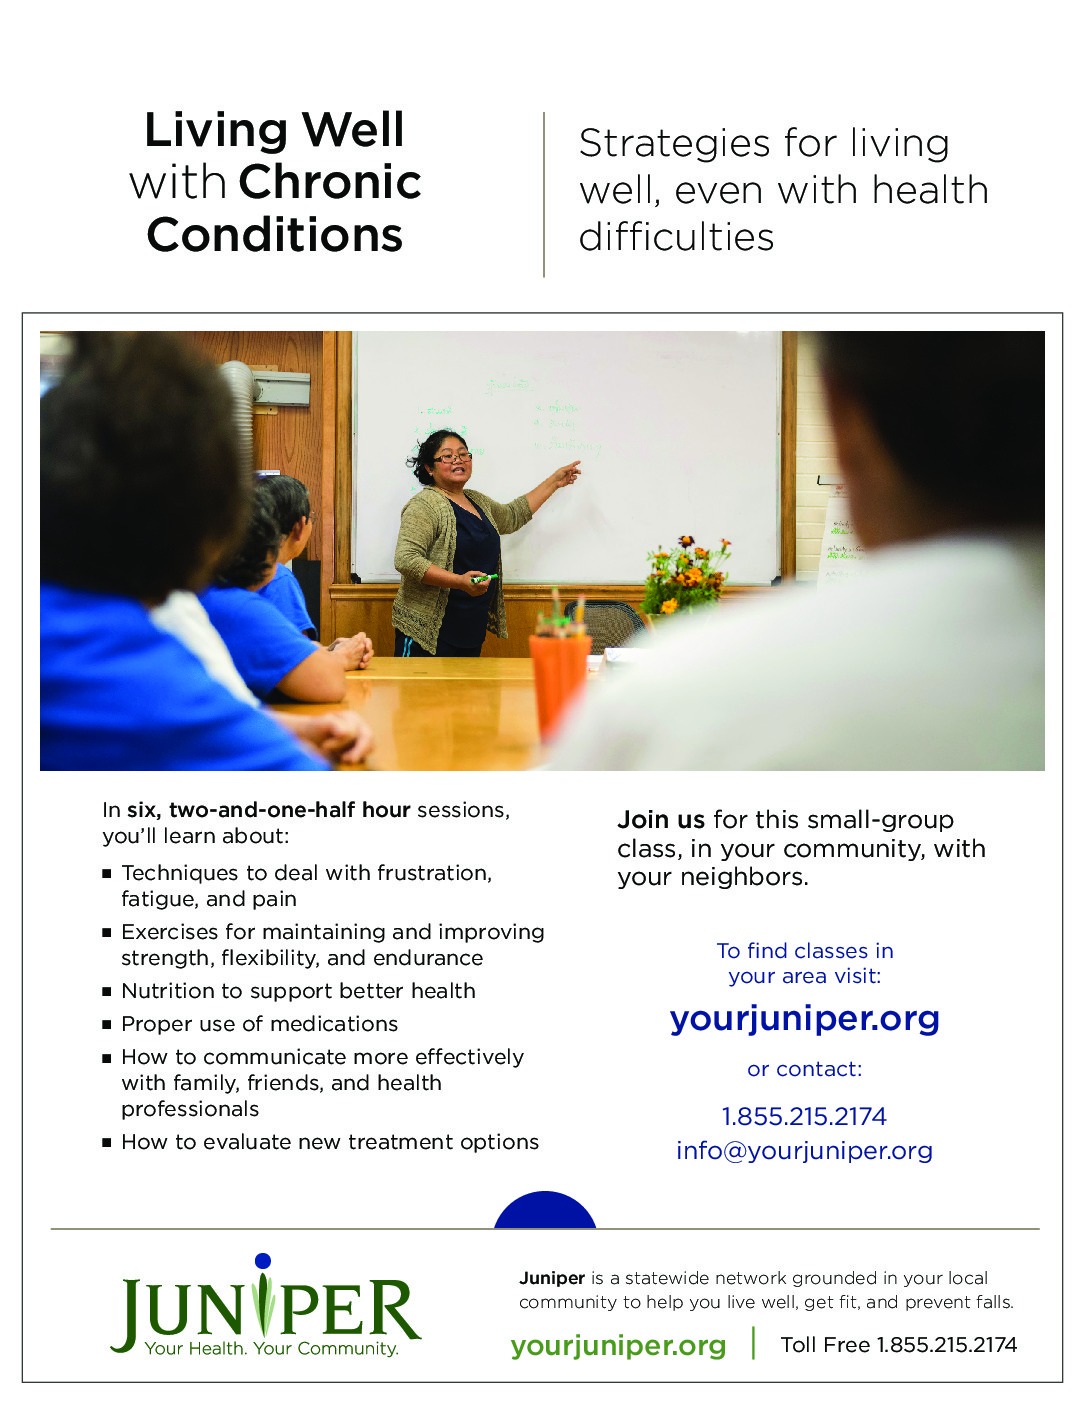 Info sheet about Living Well with Chronic Conditions